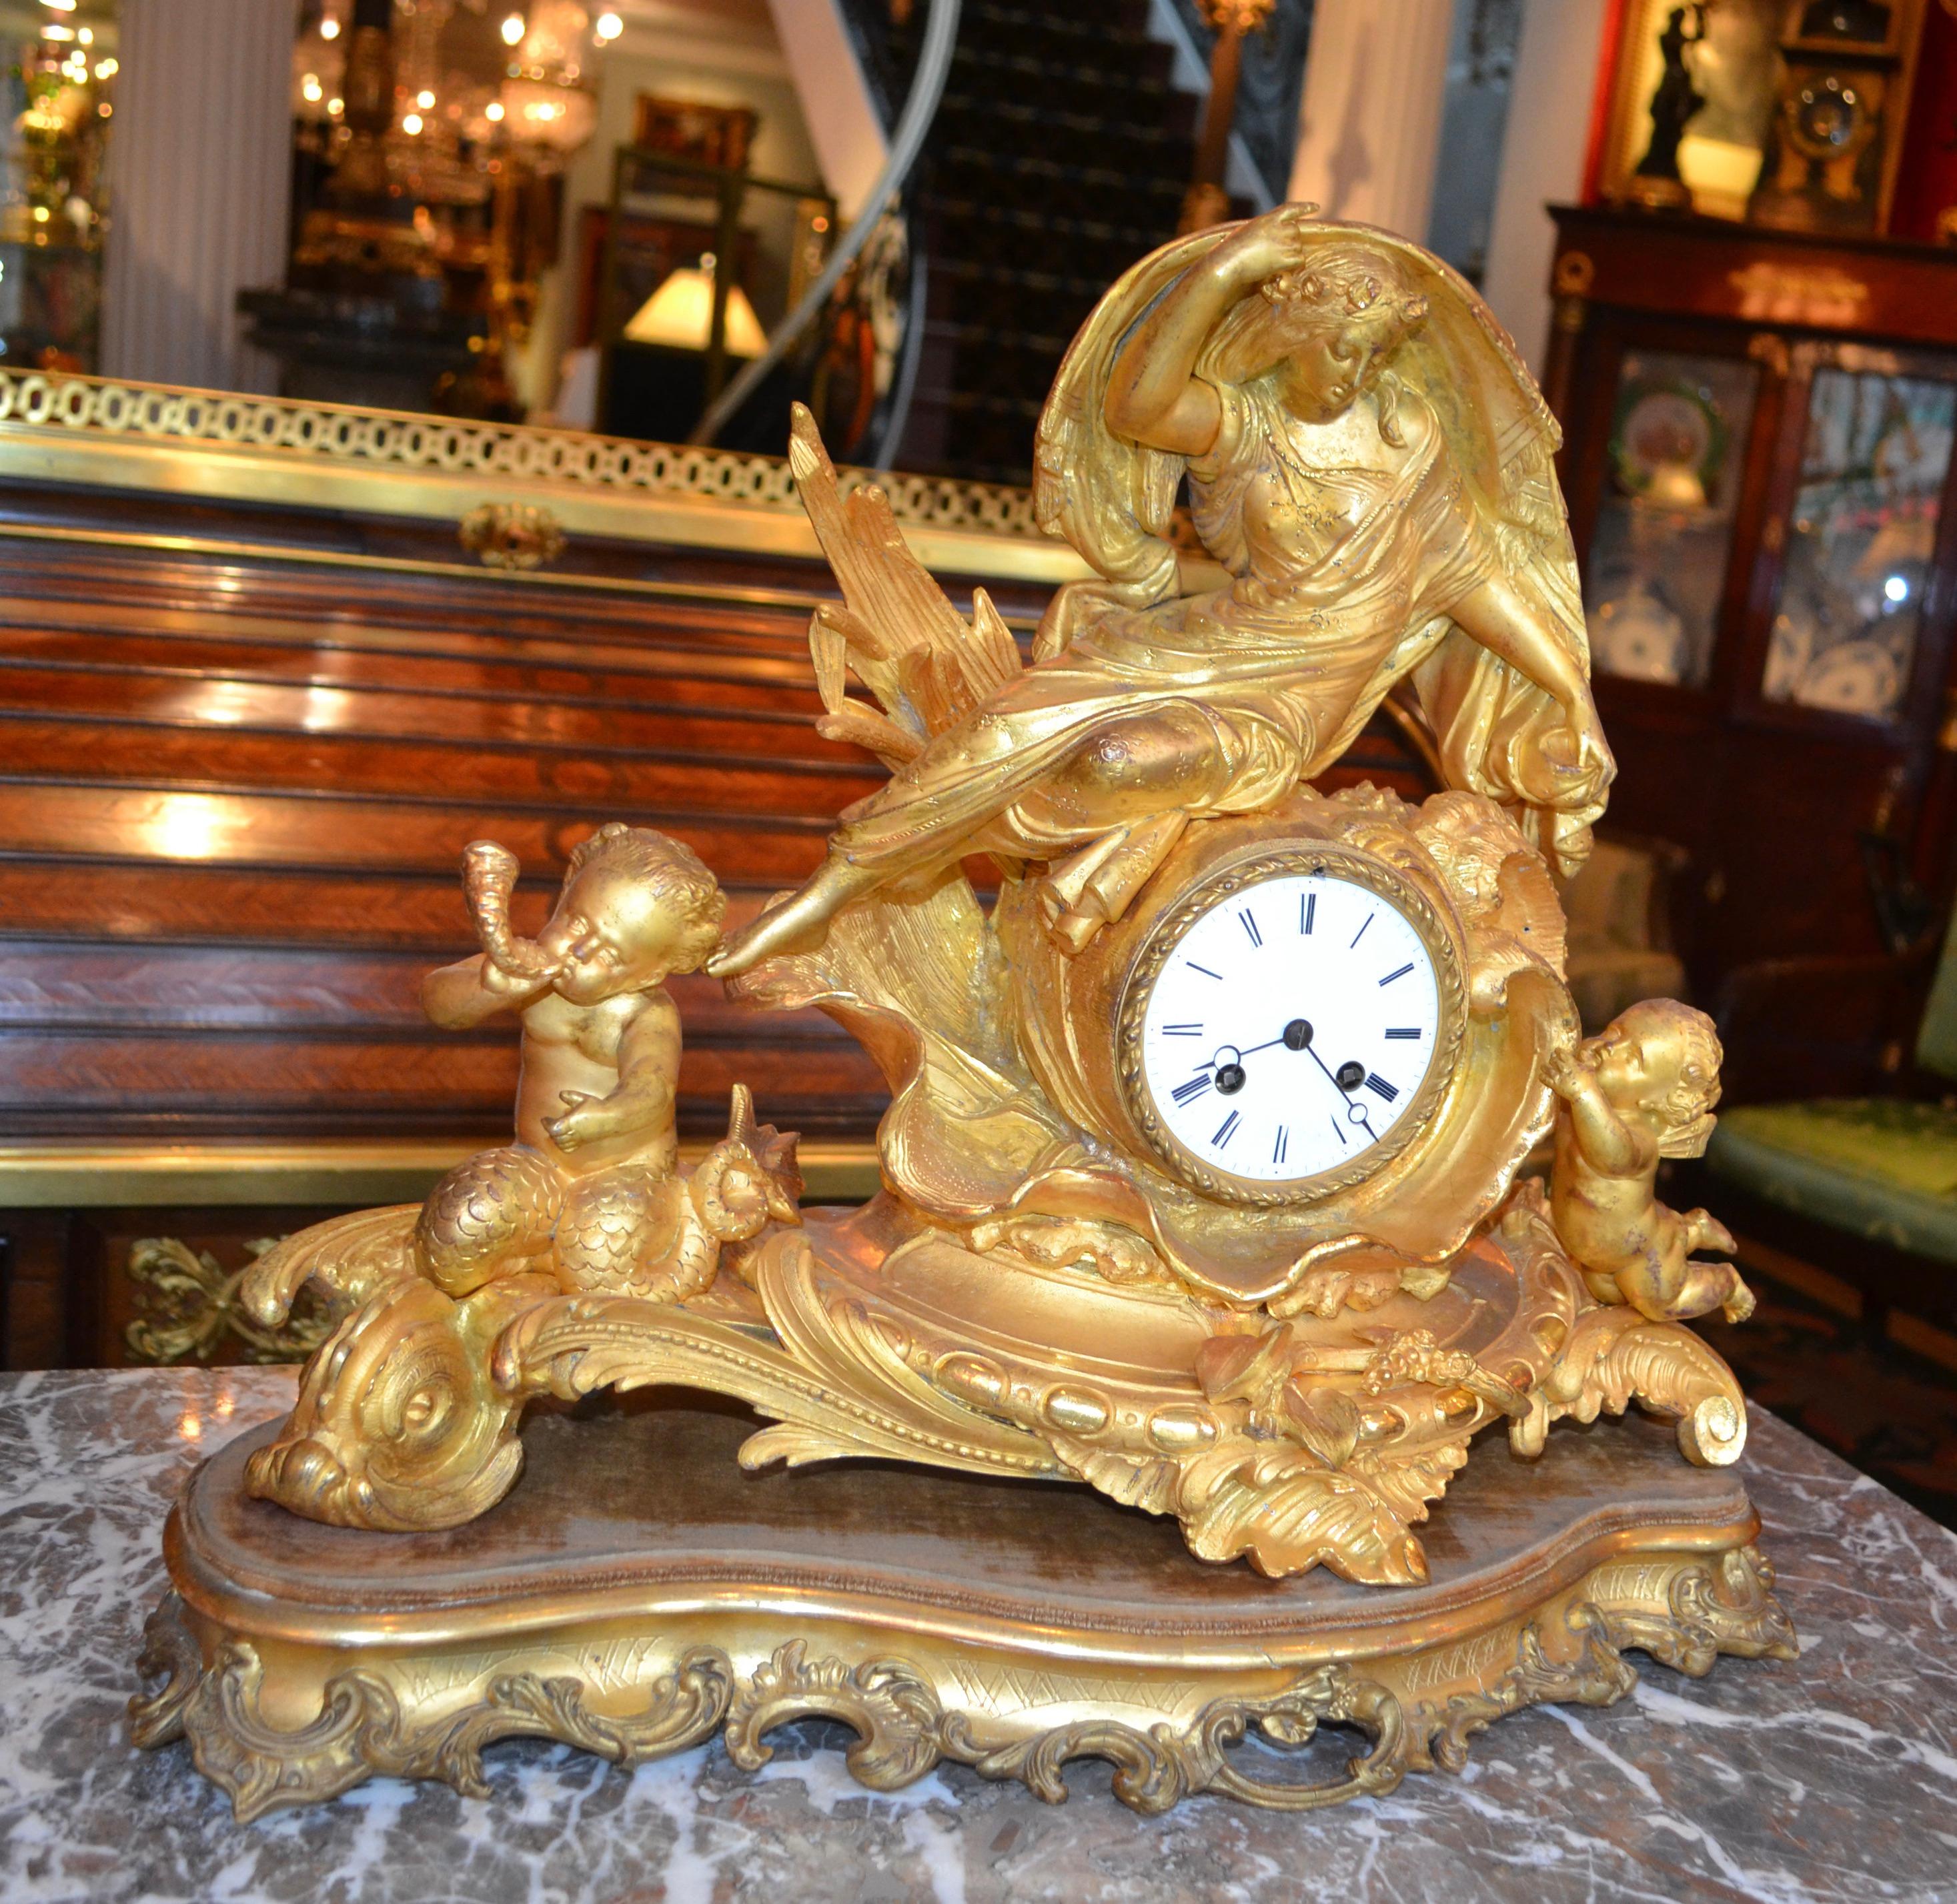 Allegorical Rococo Revival Clock Depicting a Gilt Water Sprite with Putti For Sale 4